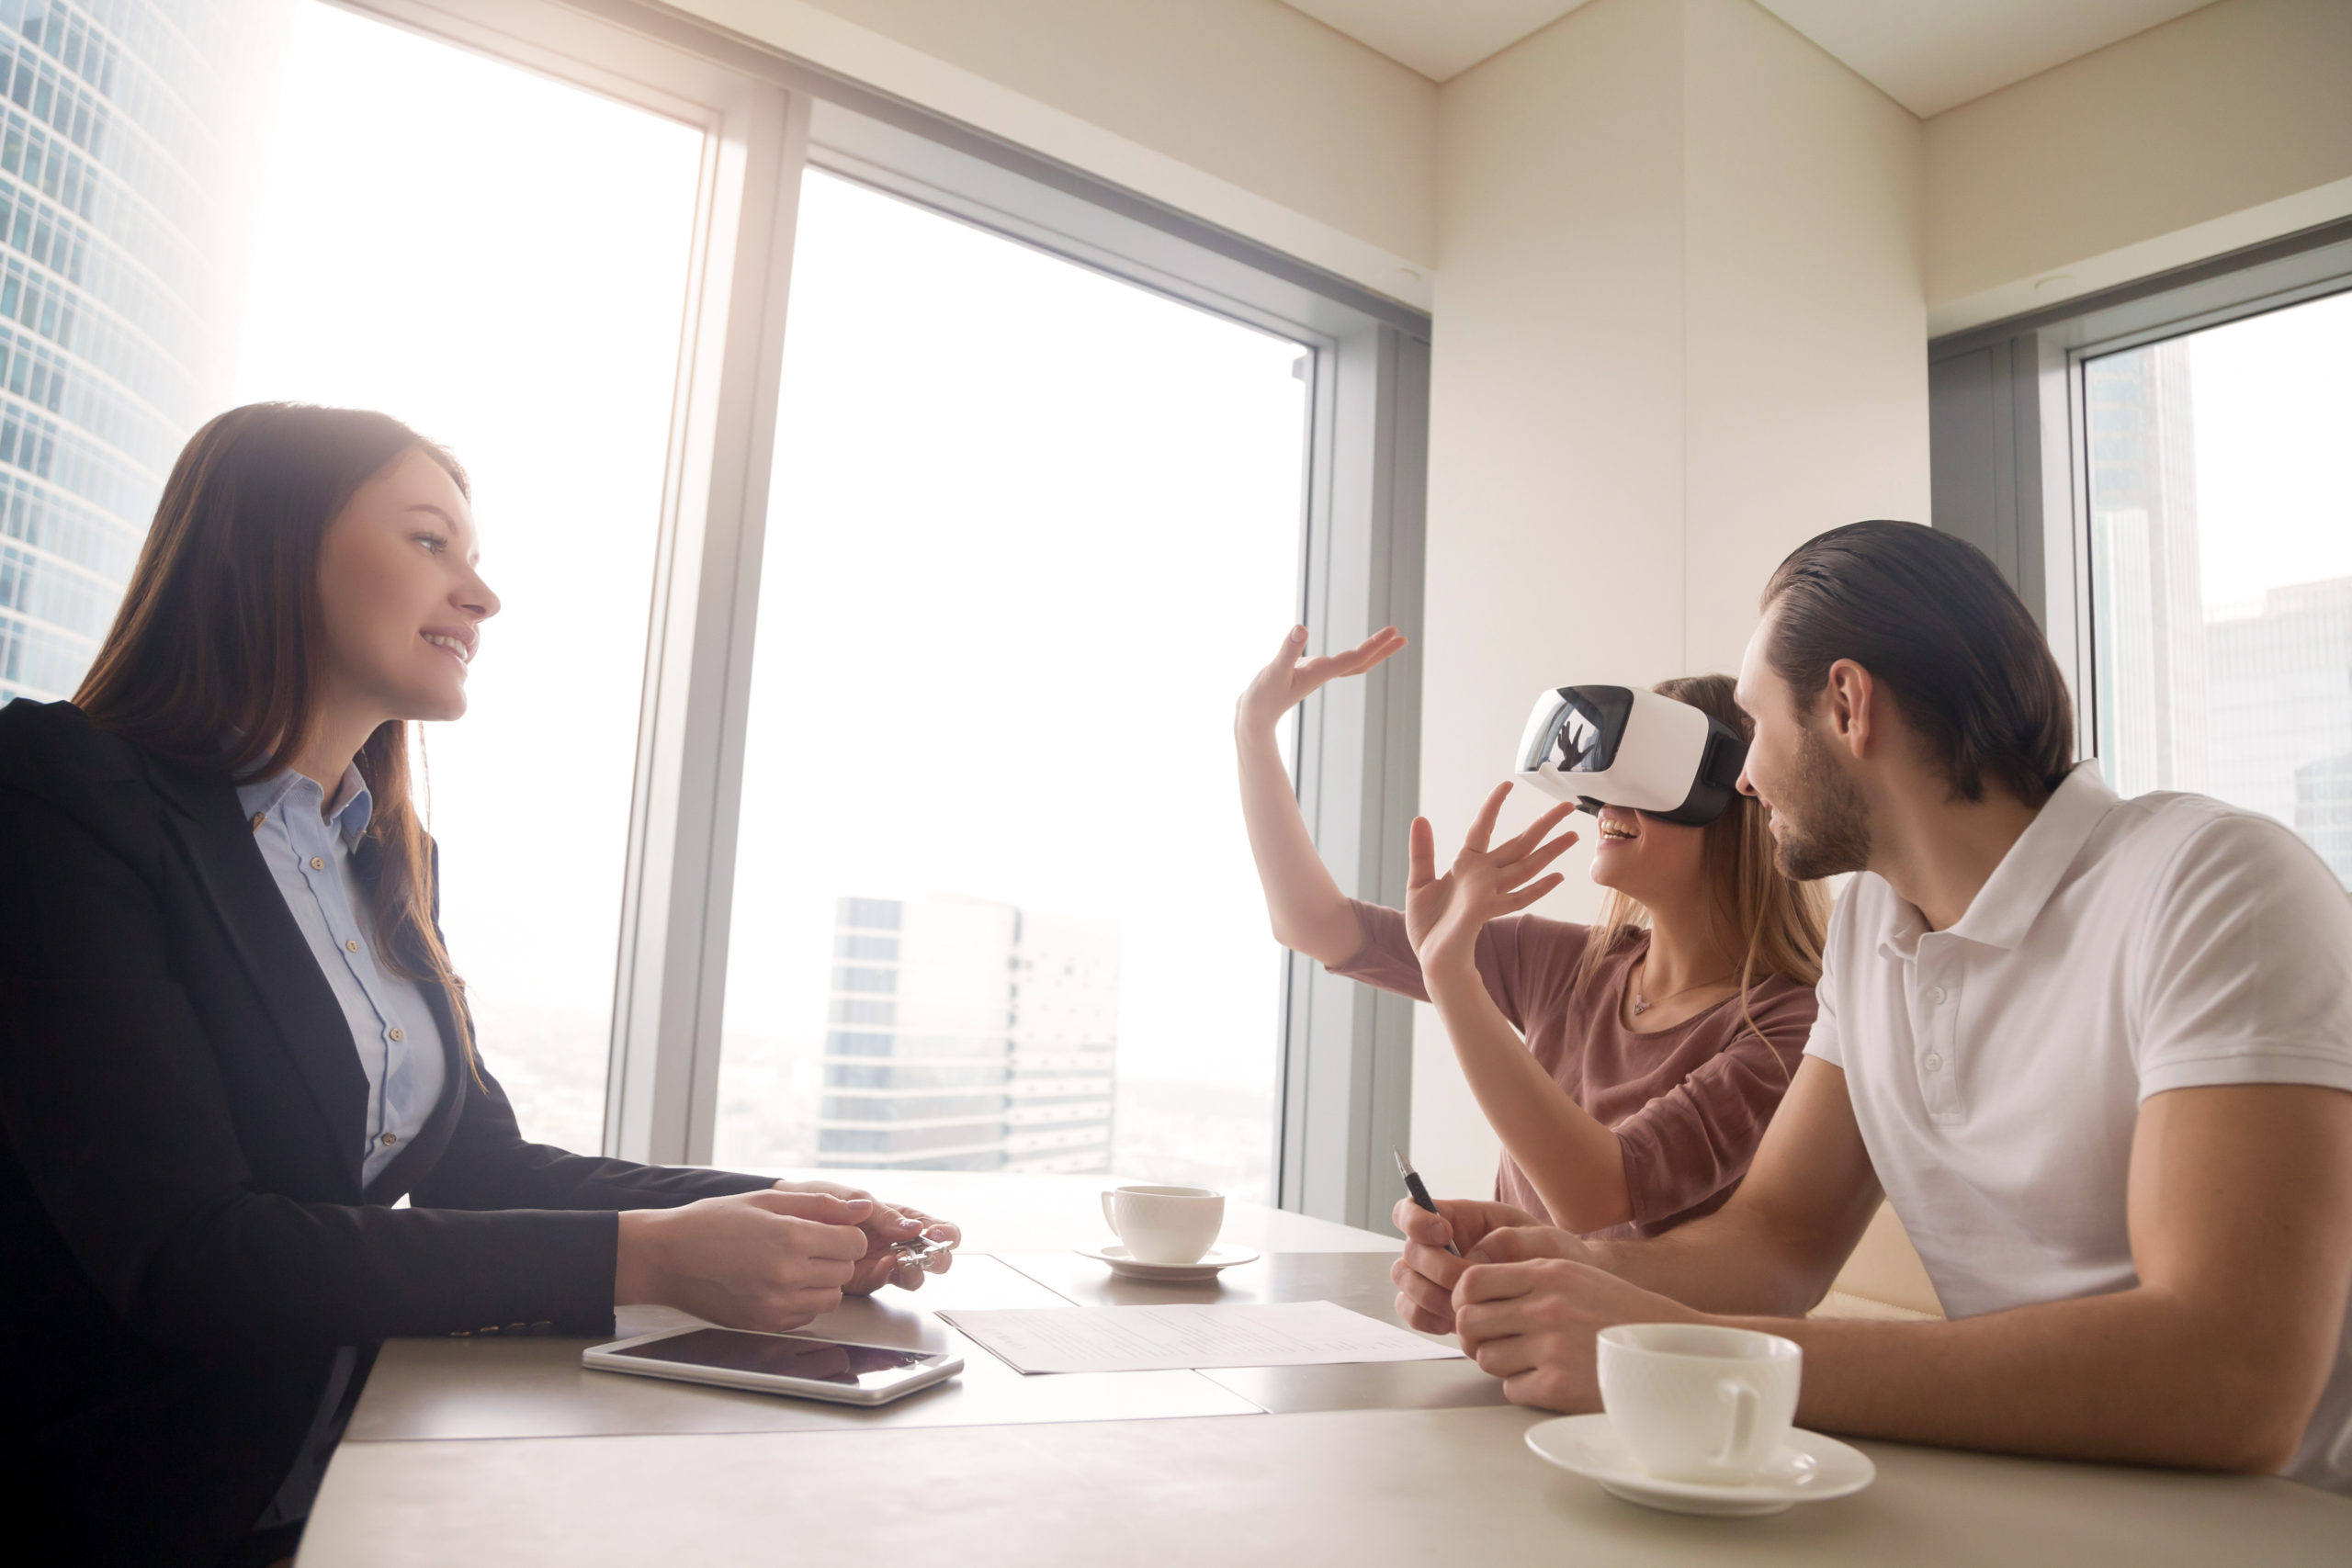 Using virtual reality glasses, VR headset for real estate tours